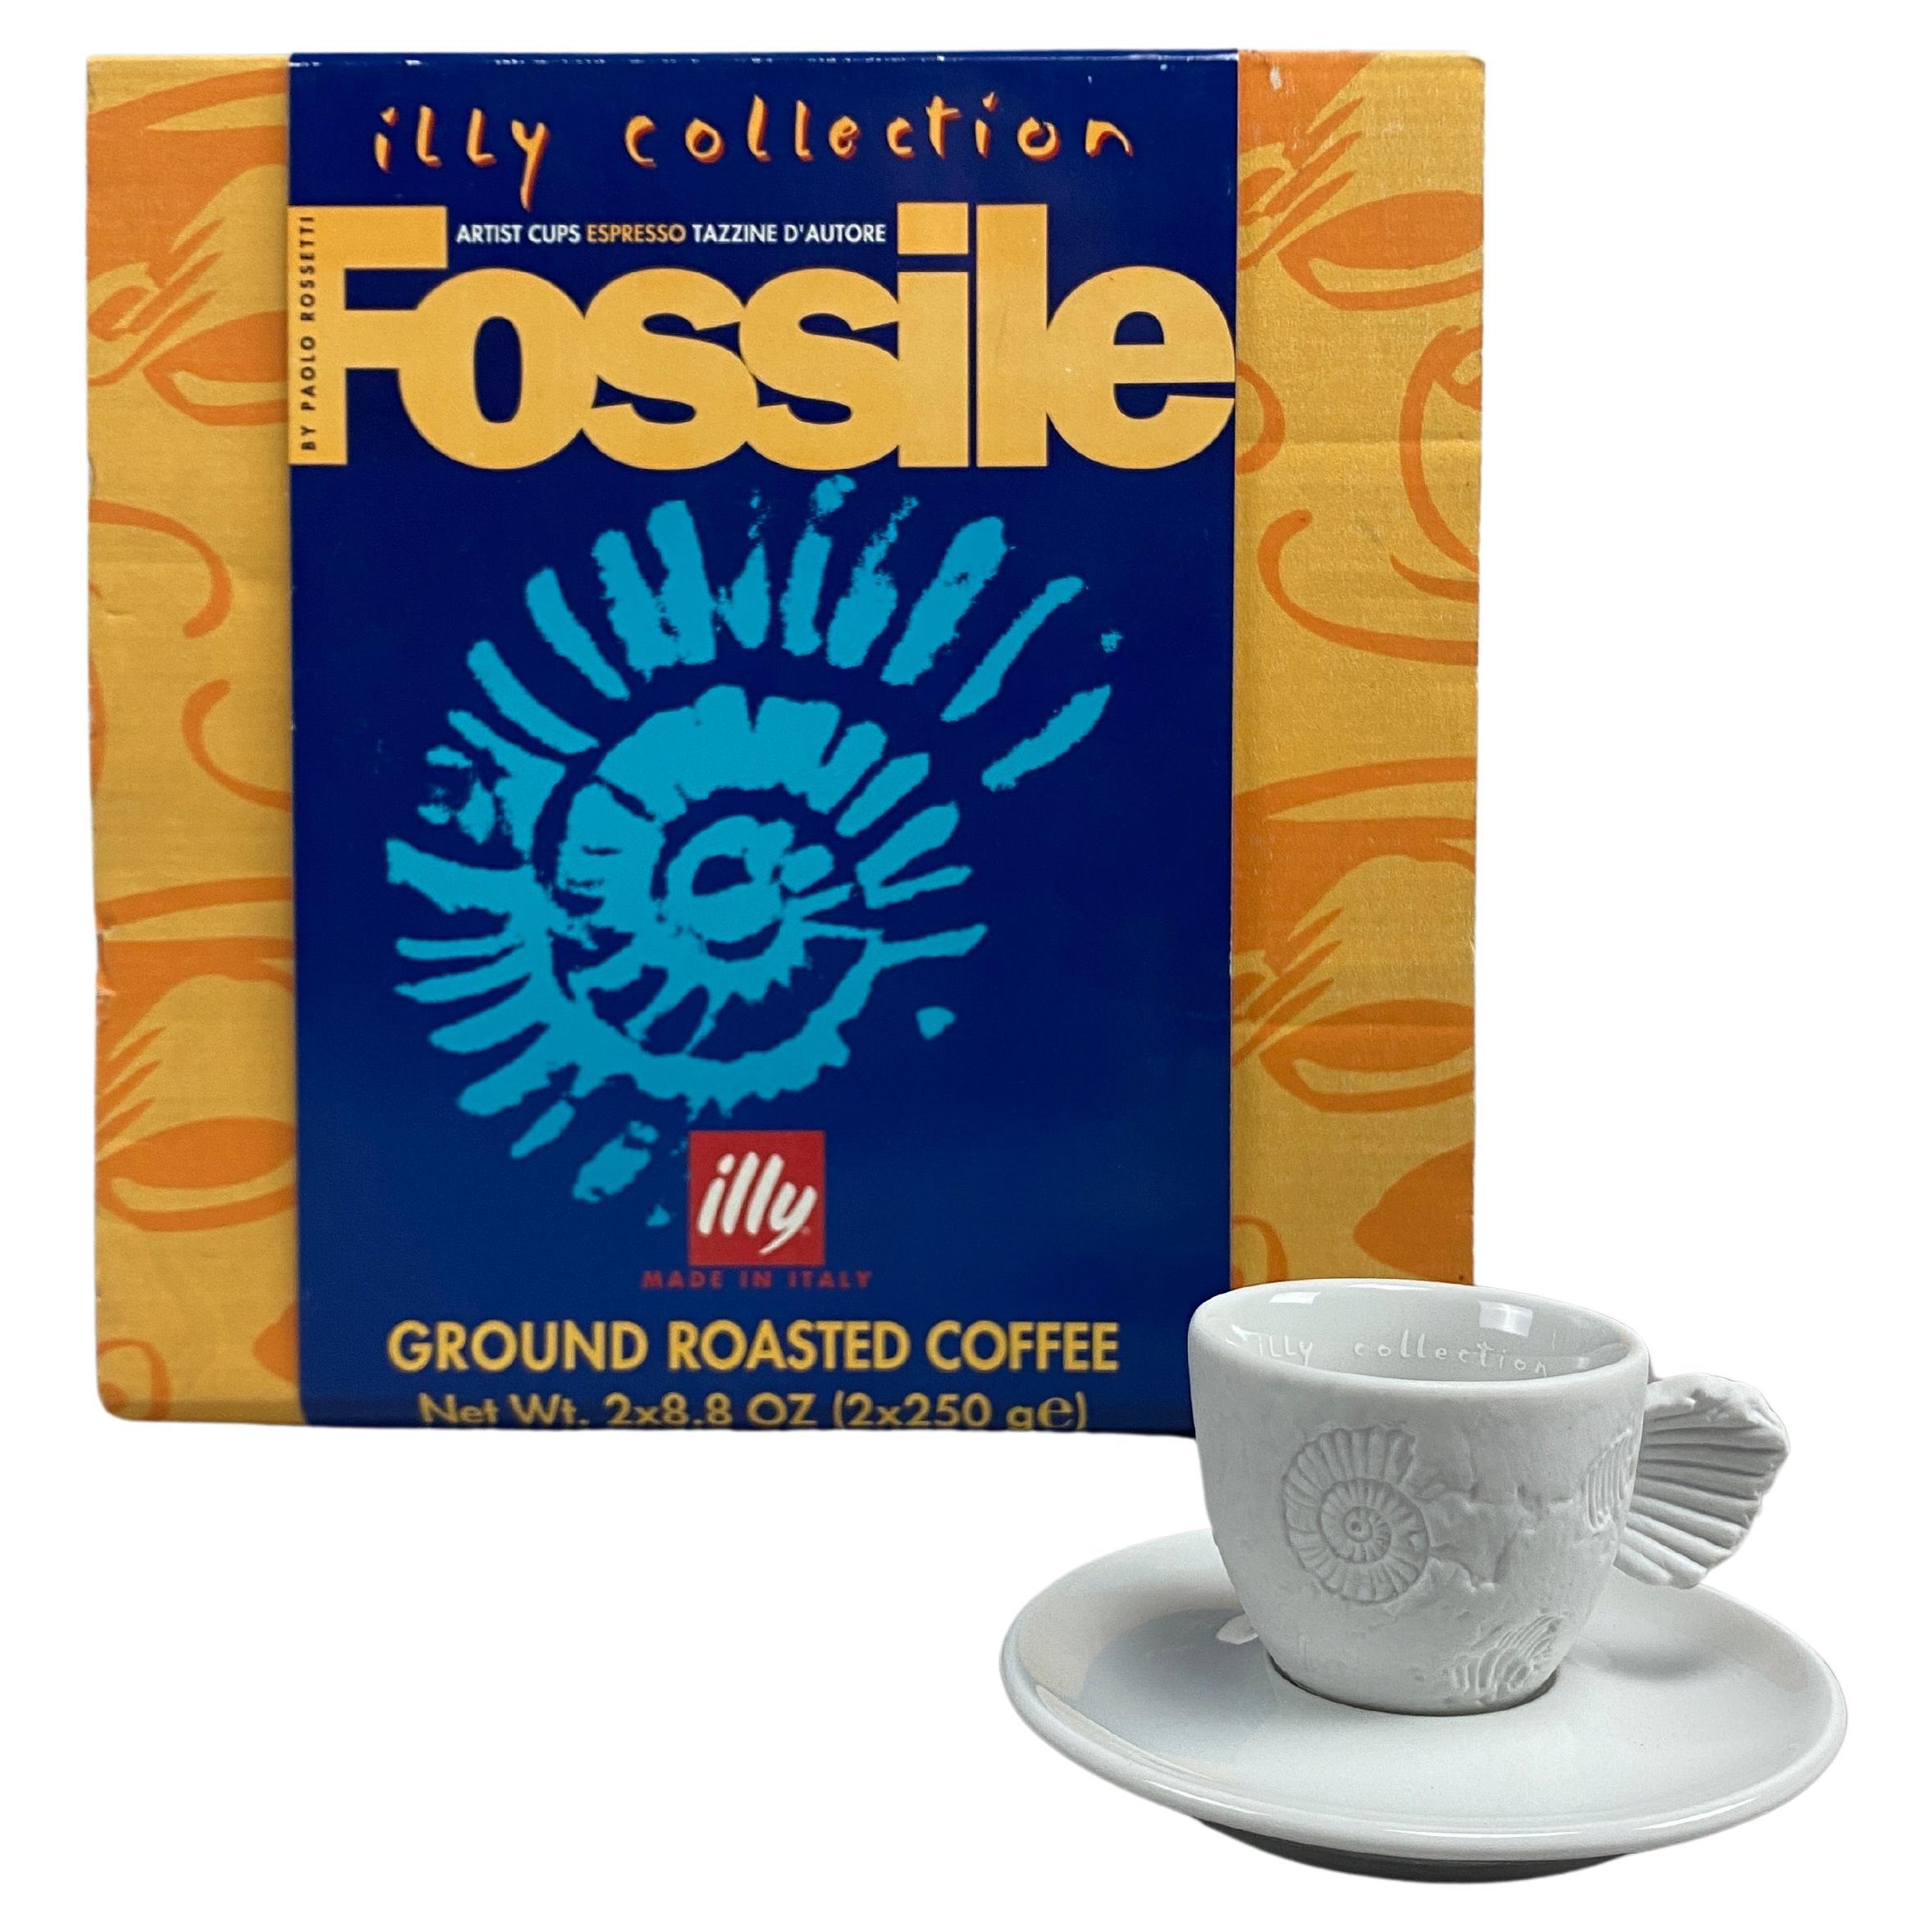 Fossile Espresso Cup by Paolo Rossetti for the Illy Collection